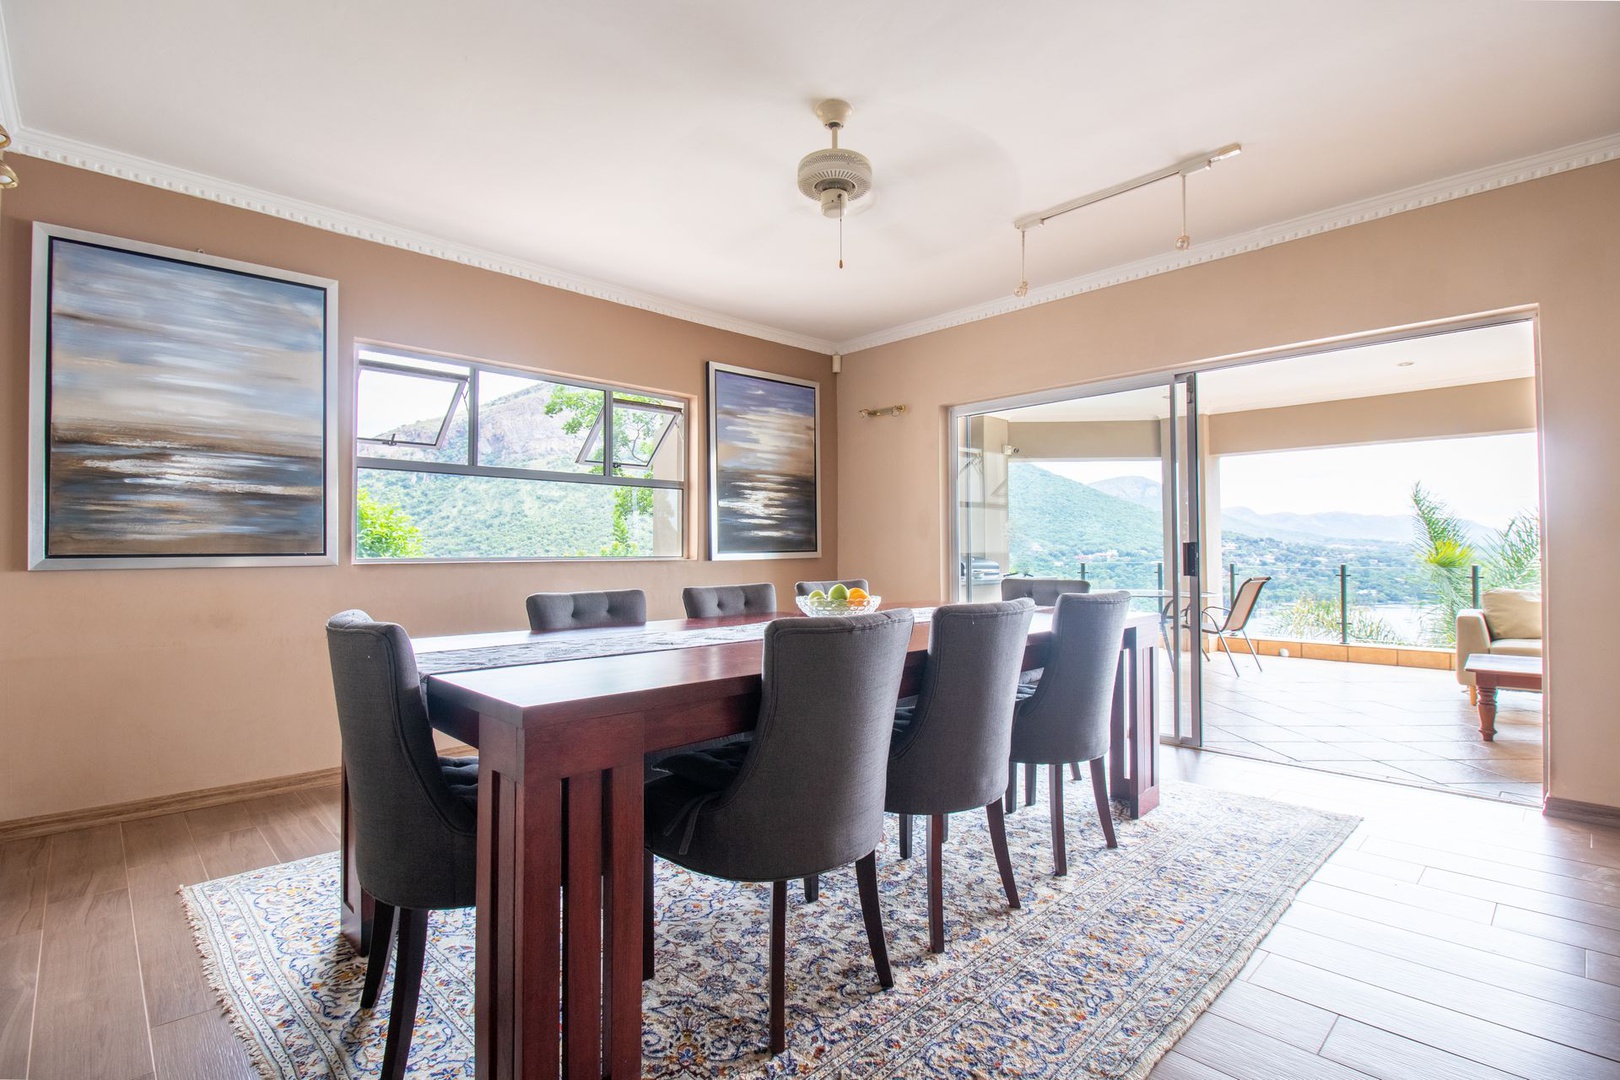 House in Kosmos - Dining room opens out to covered patio with braai facilities